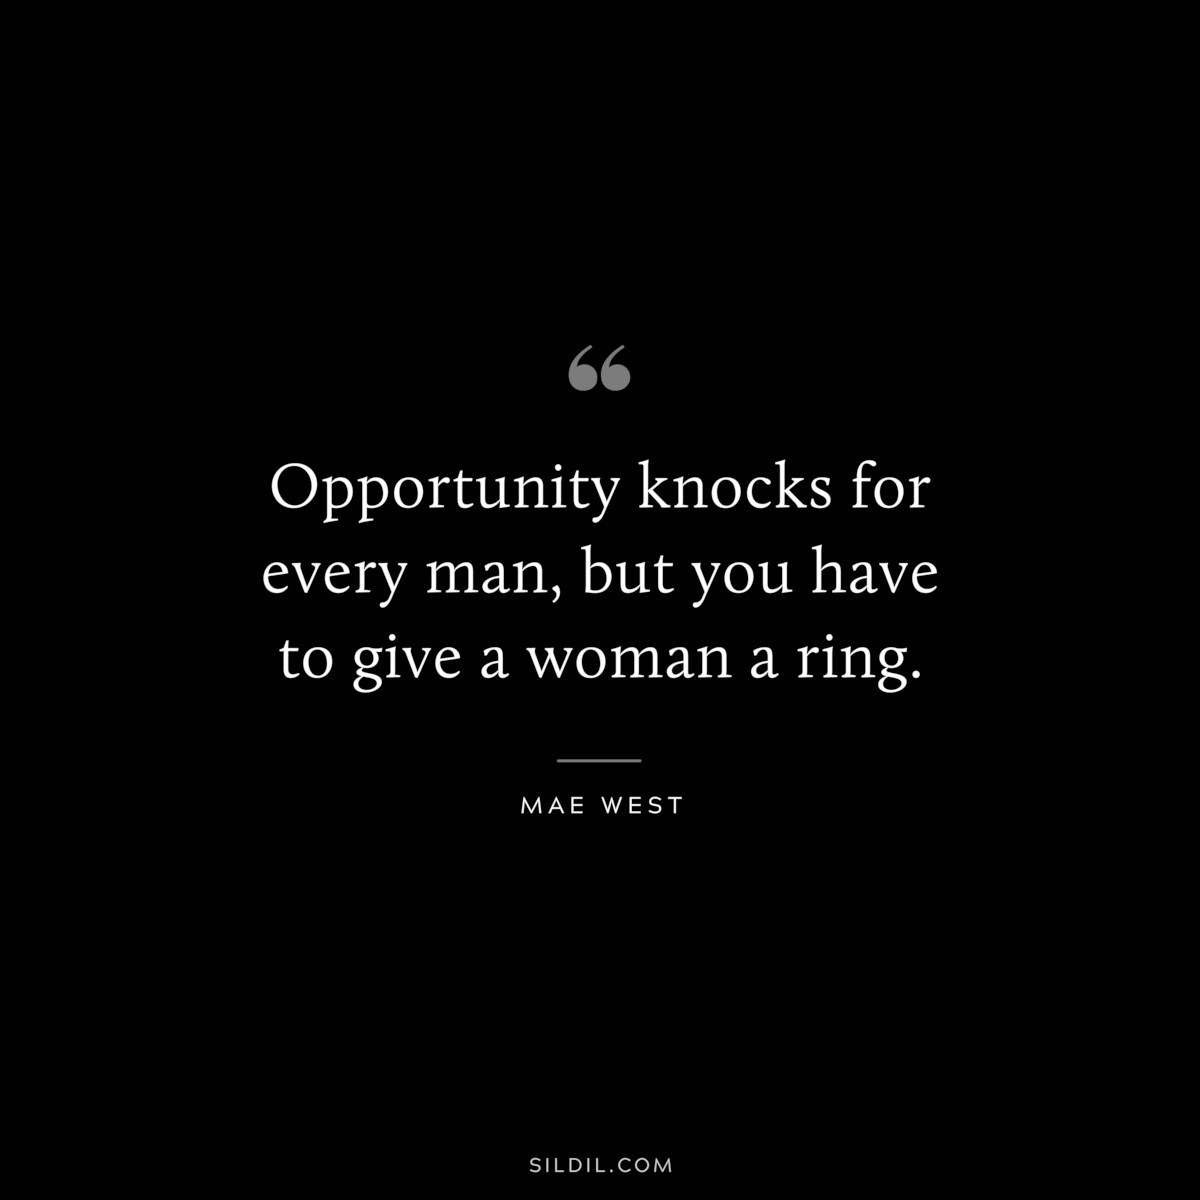 Opportunity knocks for every man, but you have to give a woman a ring. ― Mae West